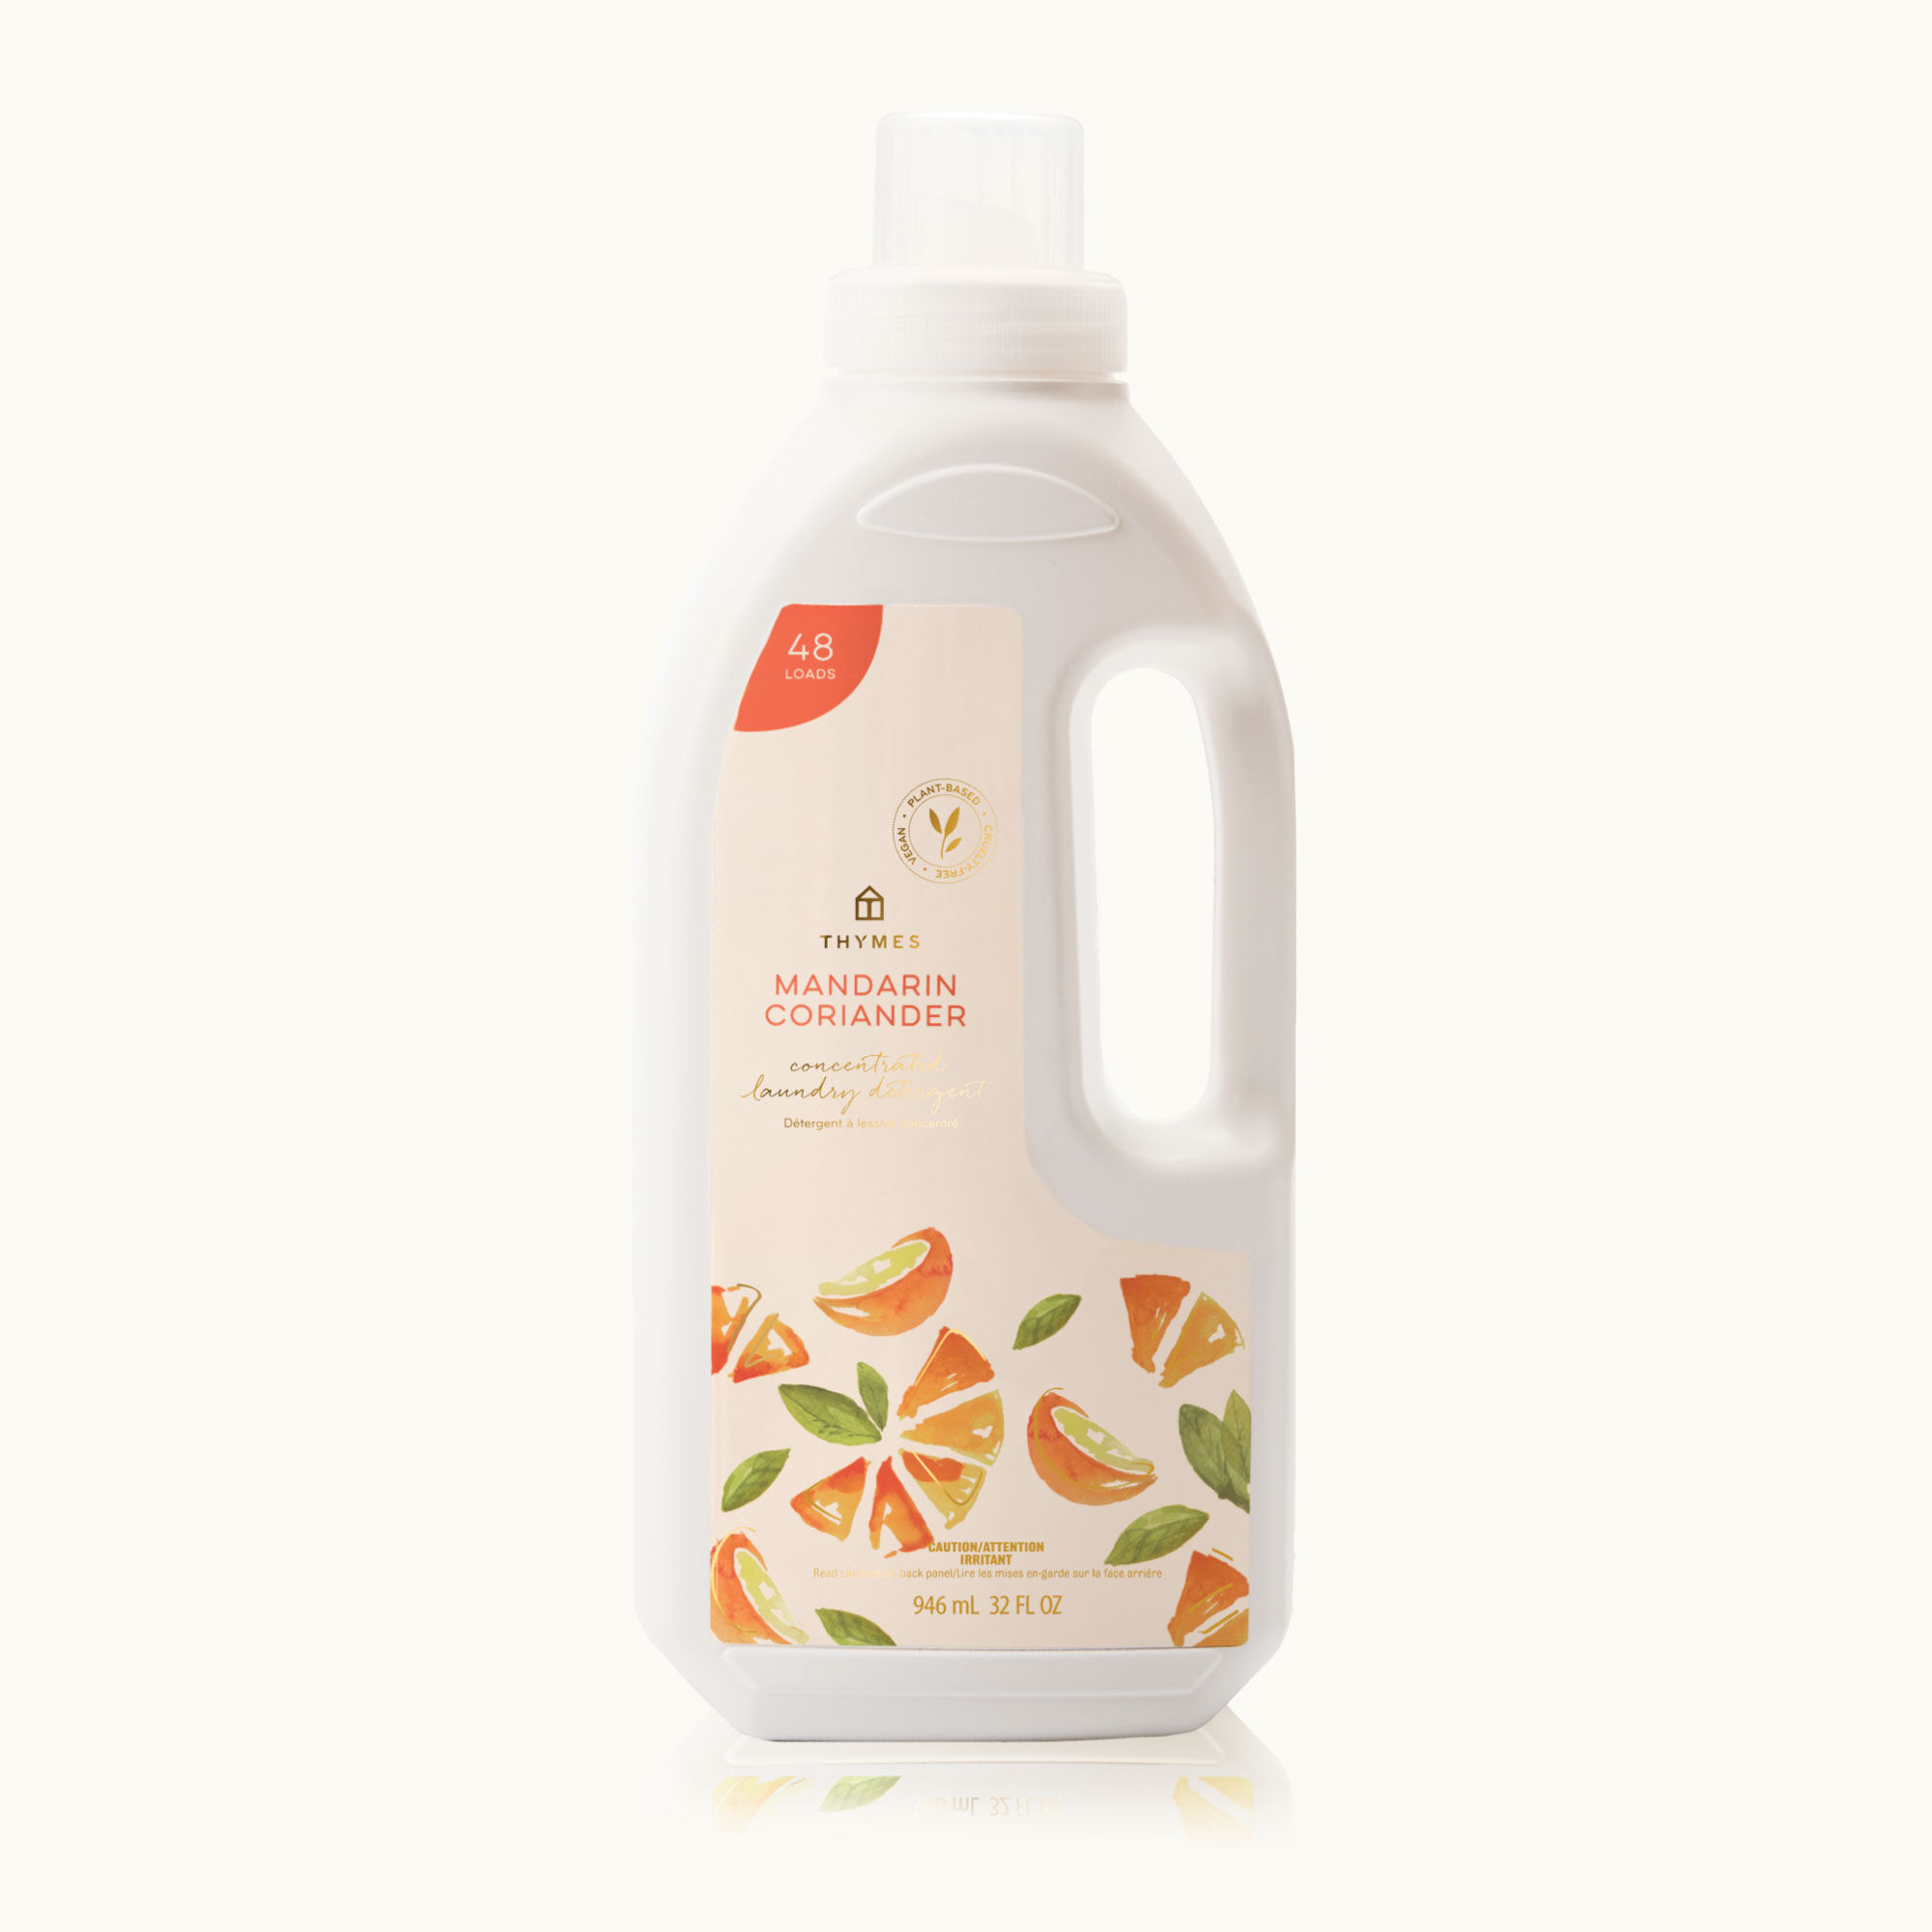 Thymes Mandarin Coriander Concentrated Laundry Detergent-1